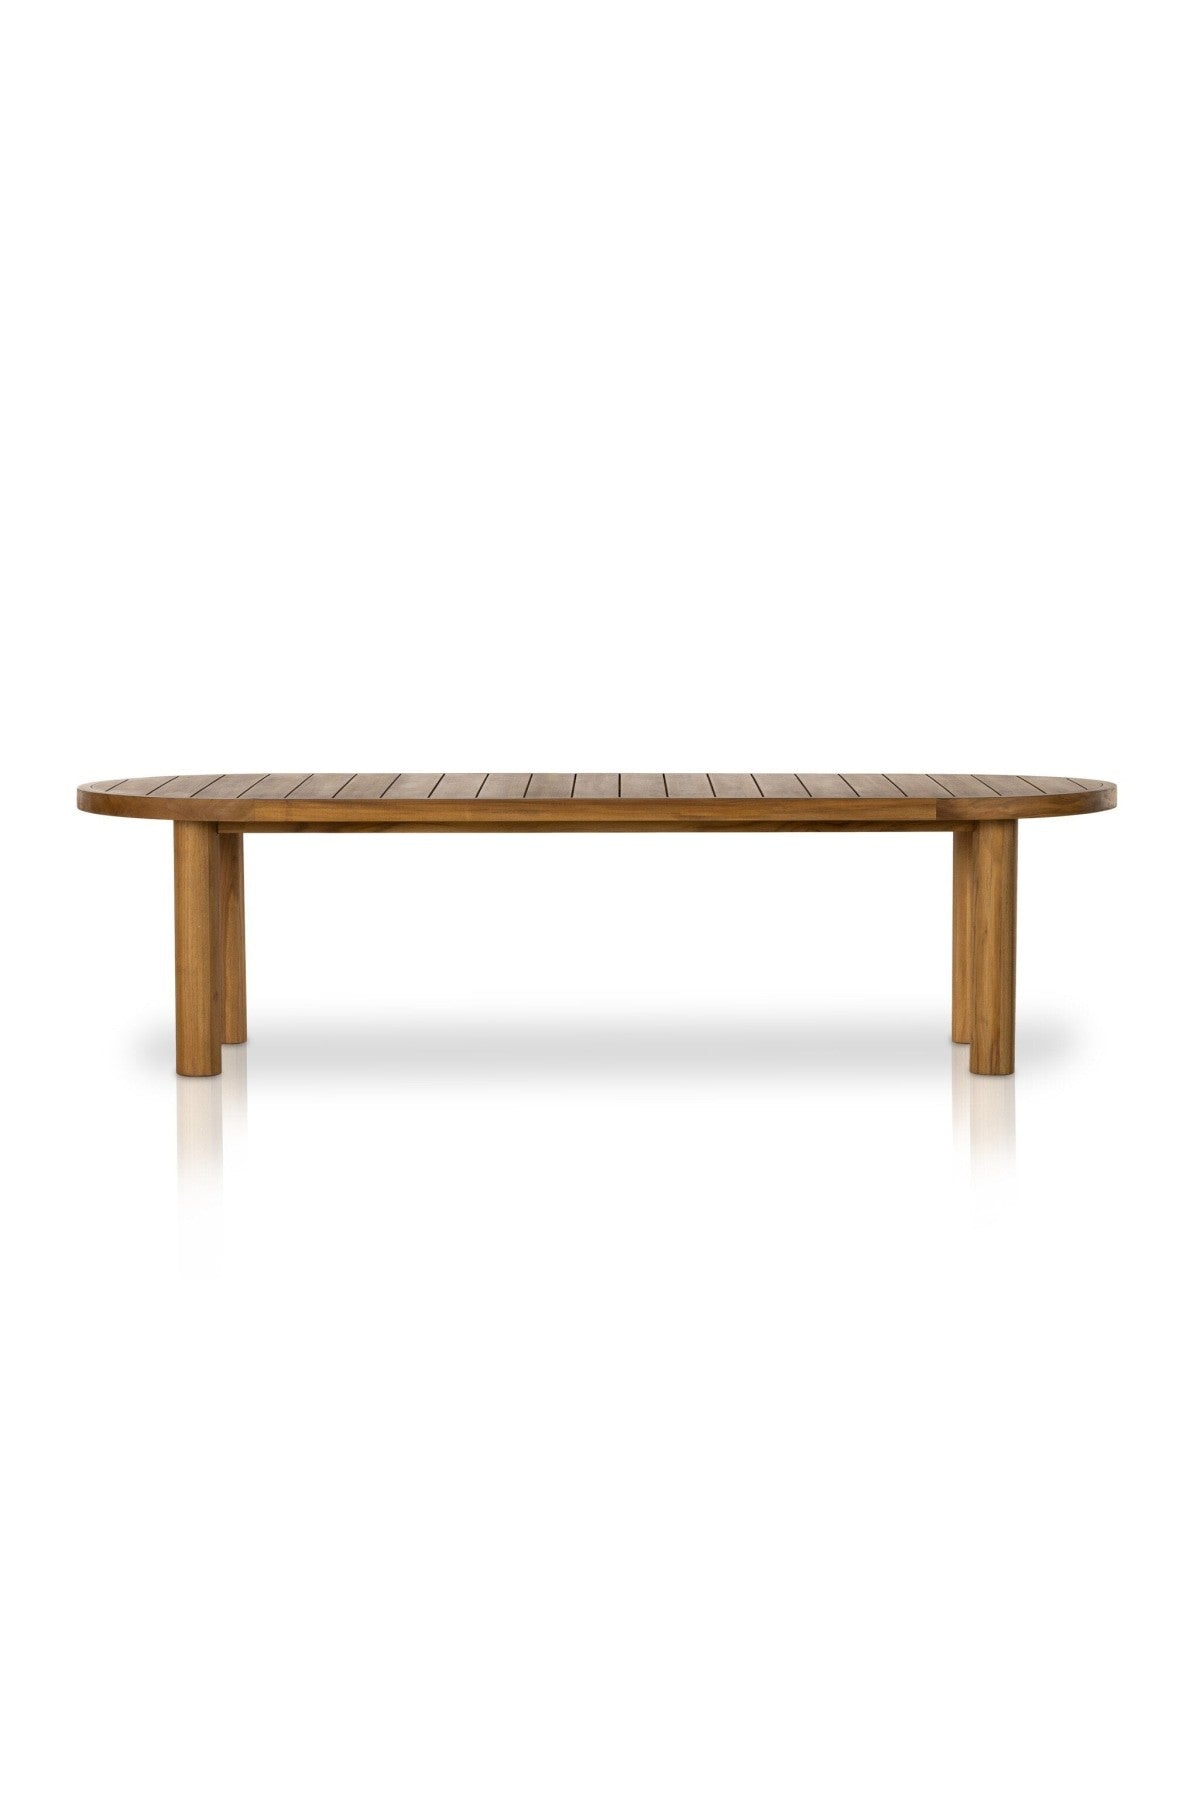 Zion Outdoor Dining Table